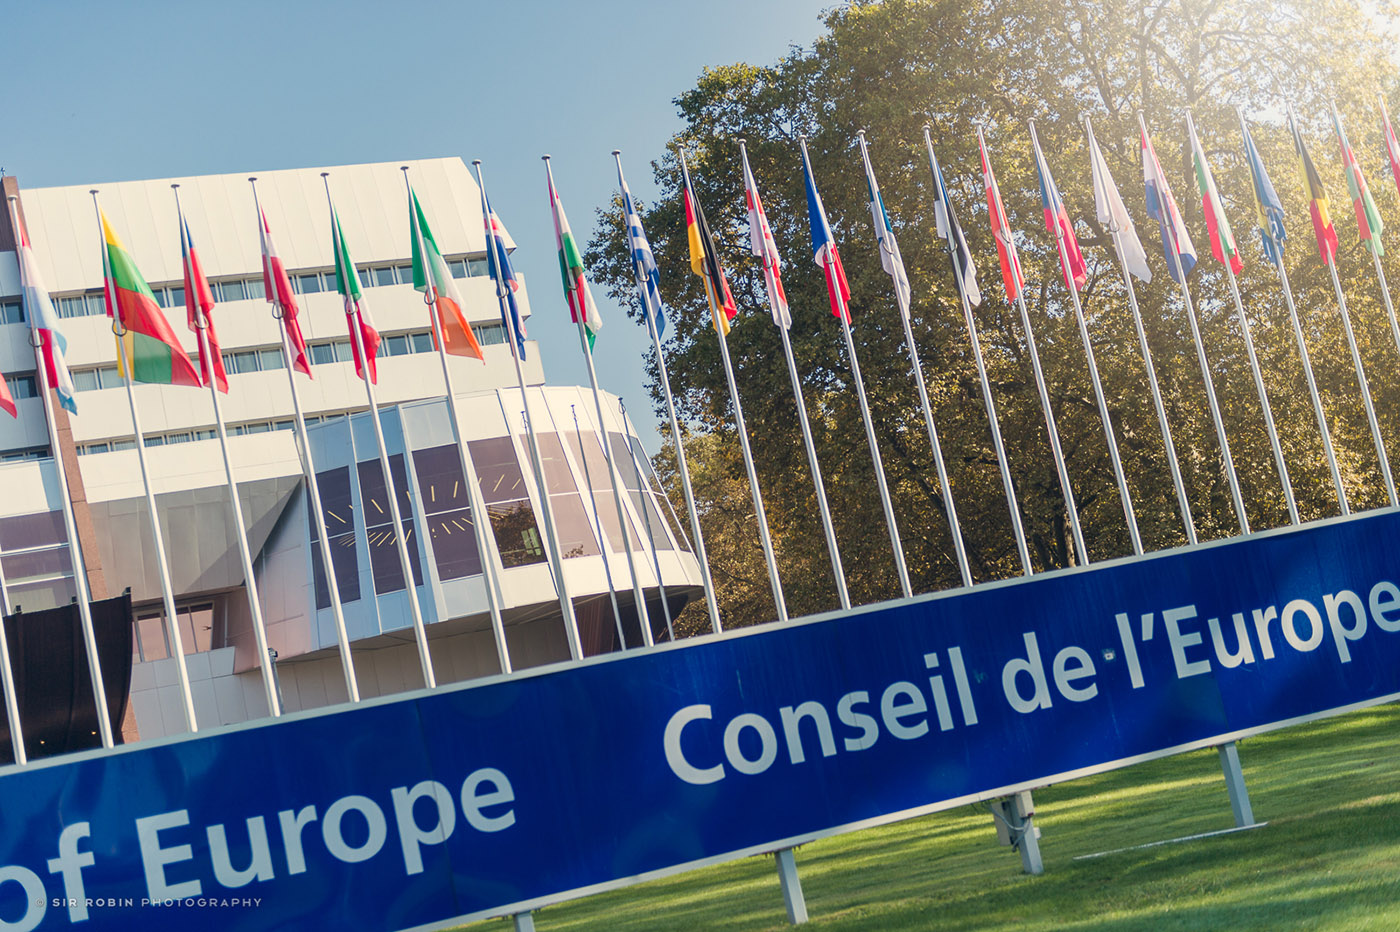 A photo of a building of Council of Europe, featuring various flags in the front.